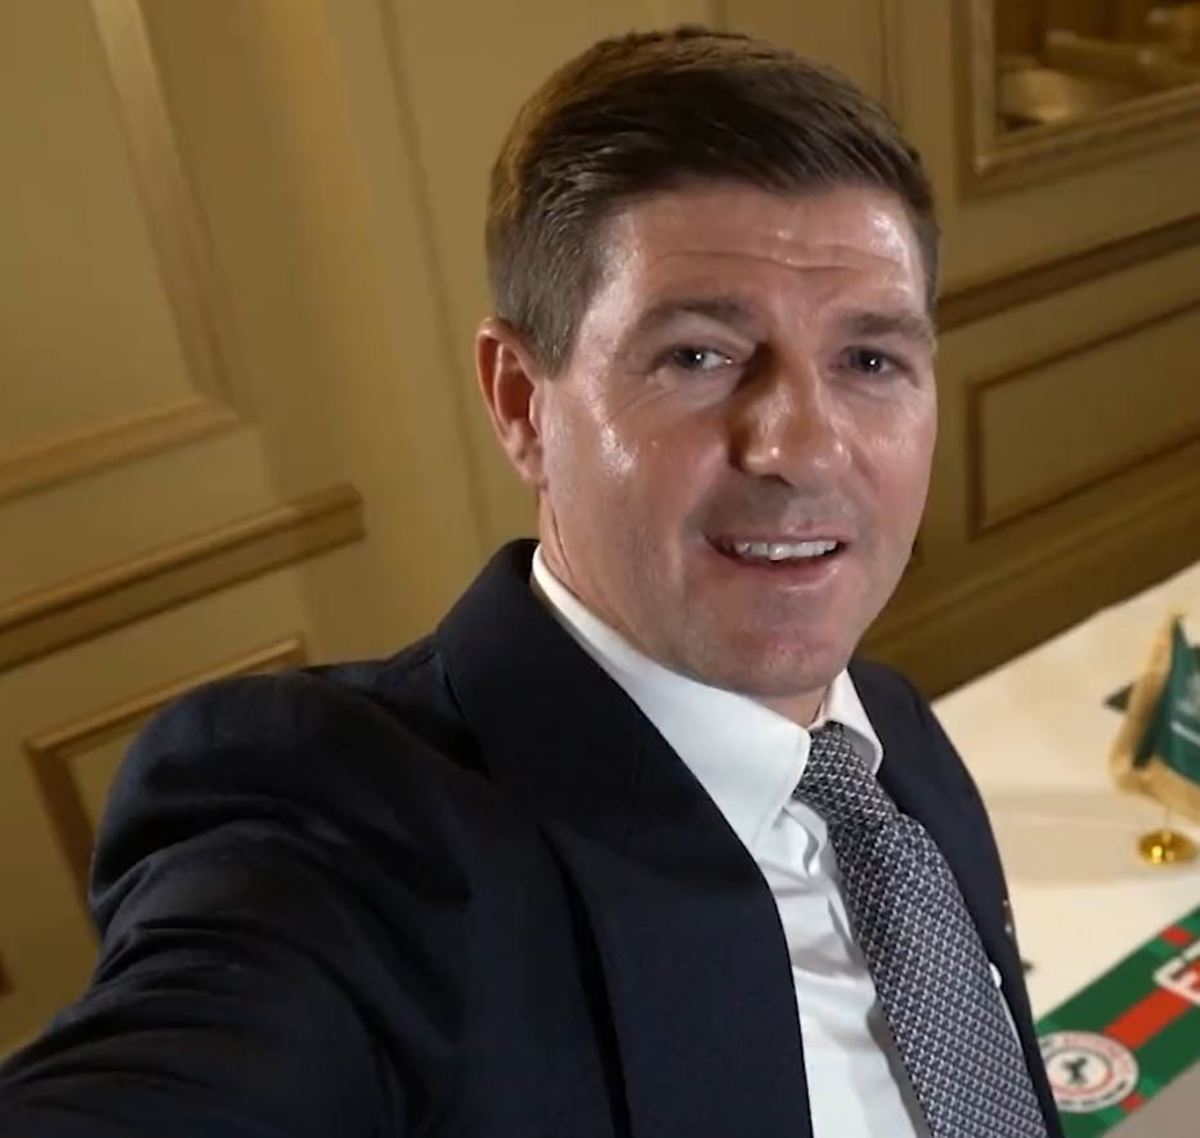 Steven Gerrard pictured taking a selfie video to deliver a message, spoken in Arabic, to fans of Al-Ettifaq after being appointed as the team's new manager in July 2023